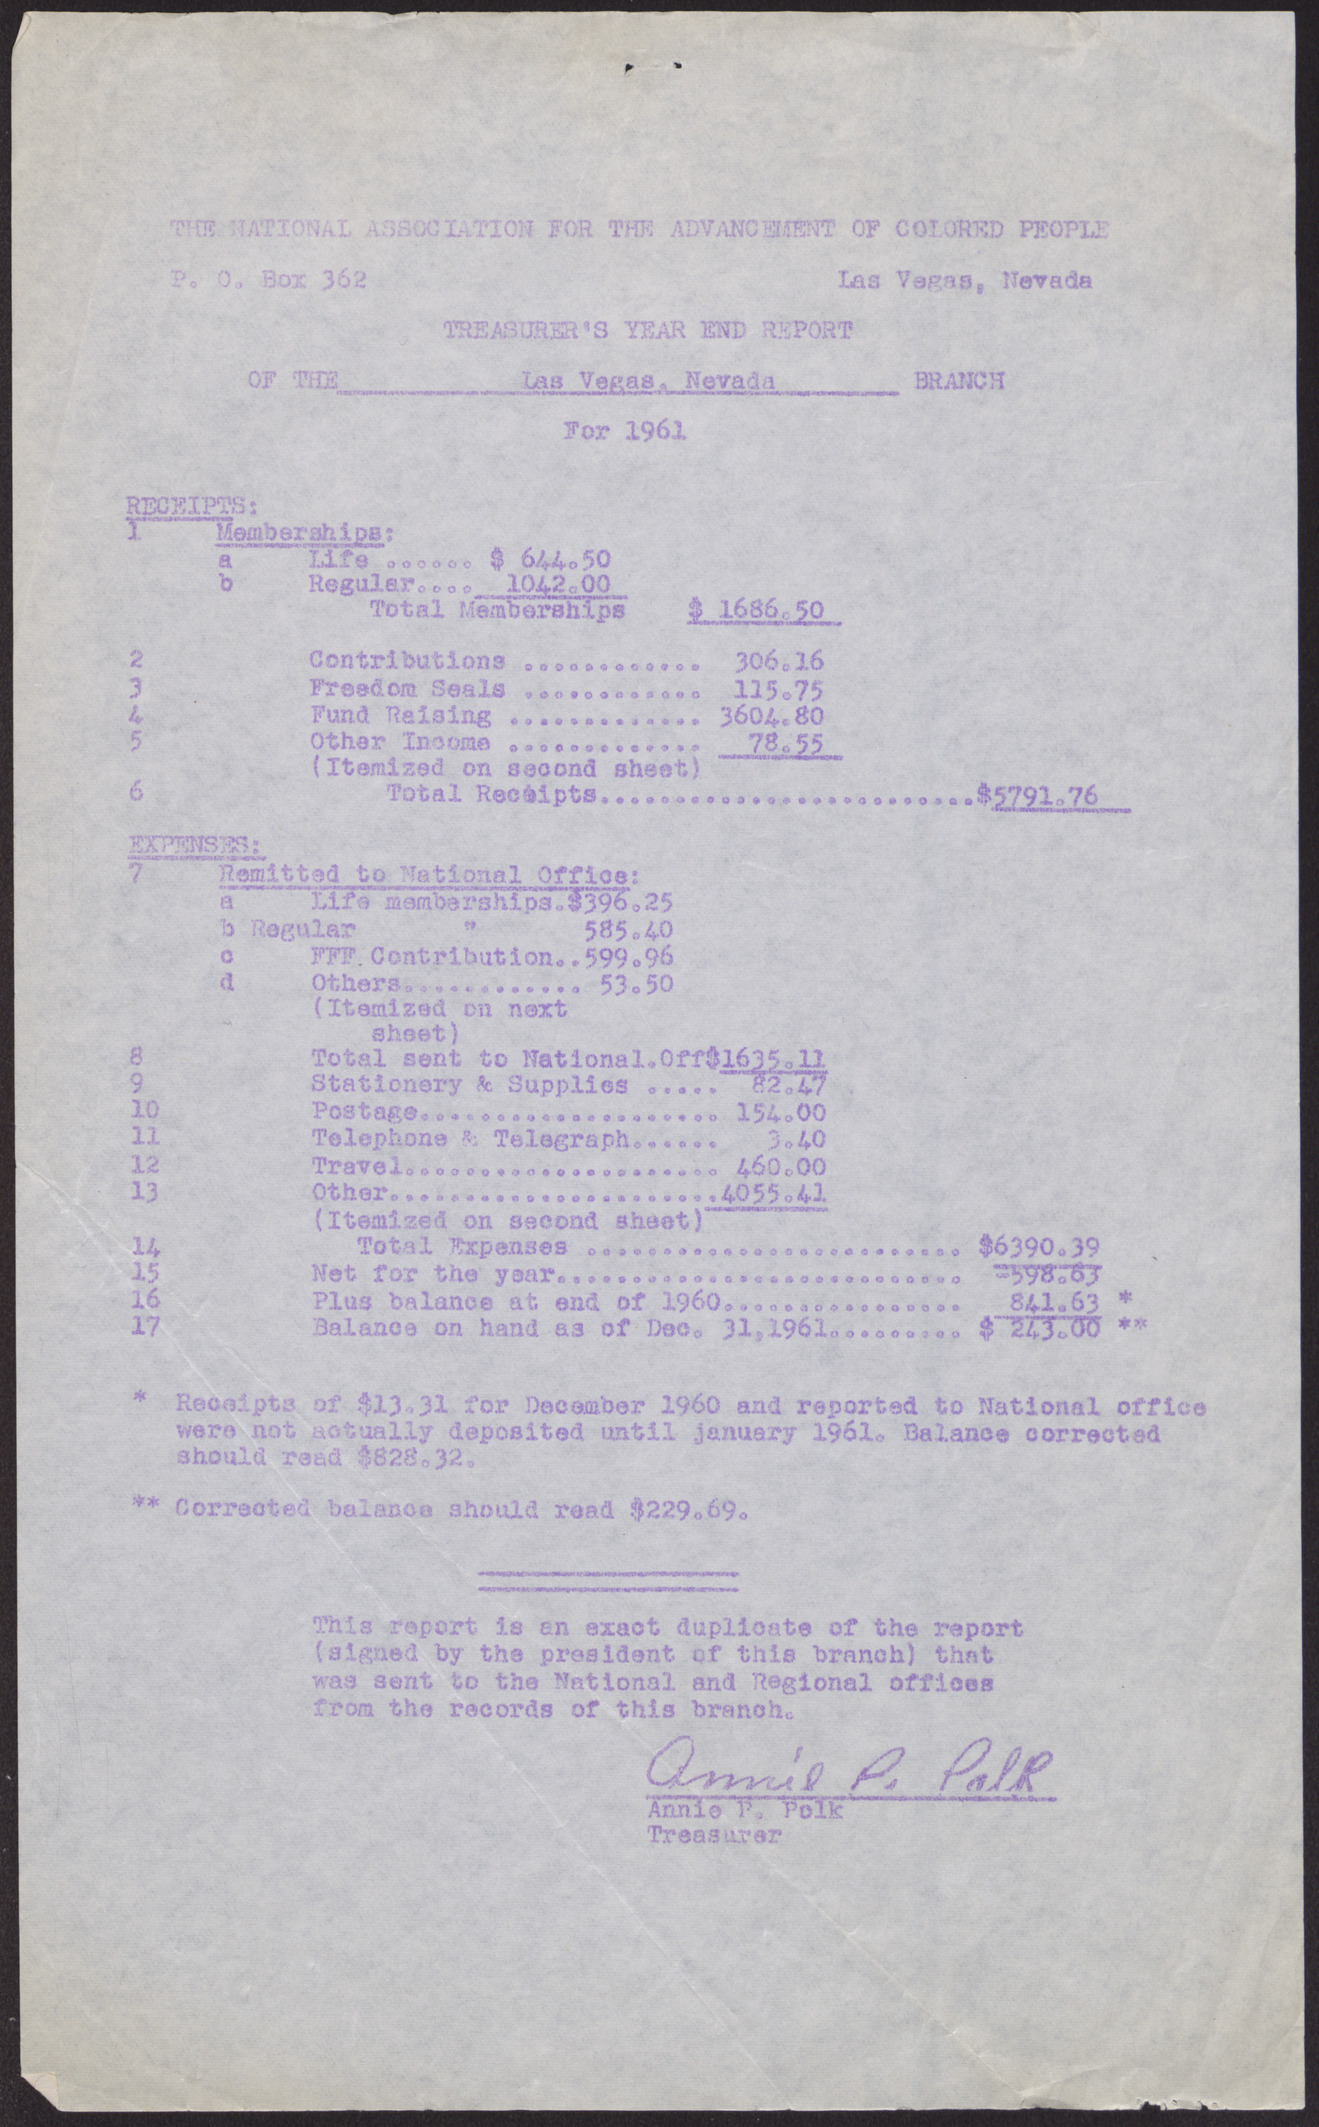 Treasurer's Year End Report of the NAACP Las Vegas Branch for 1961 (2 pages)